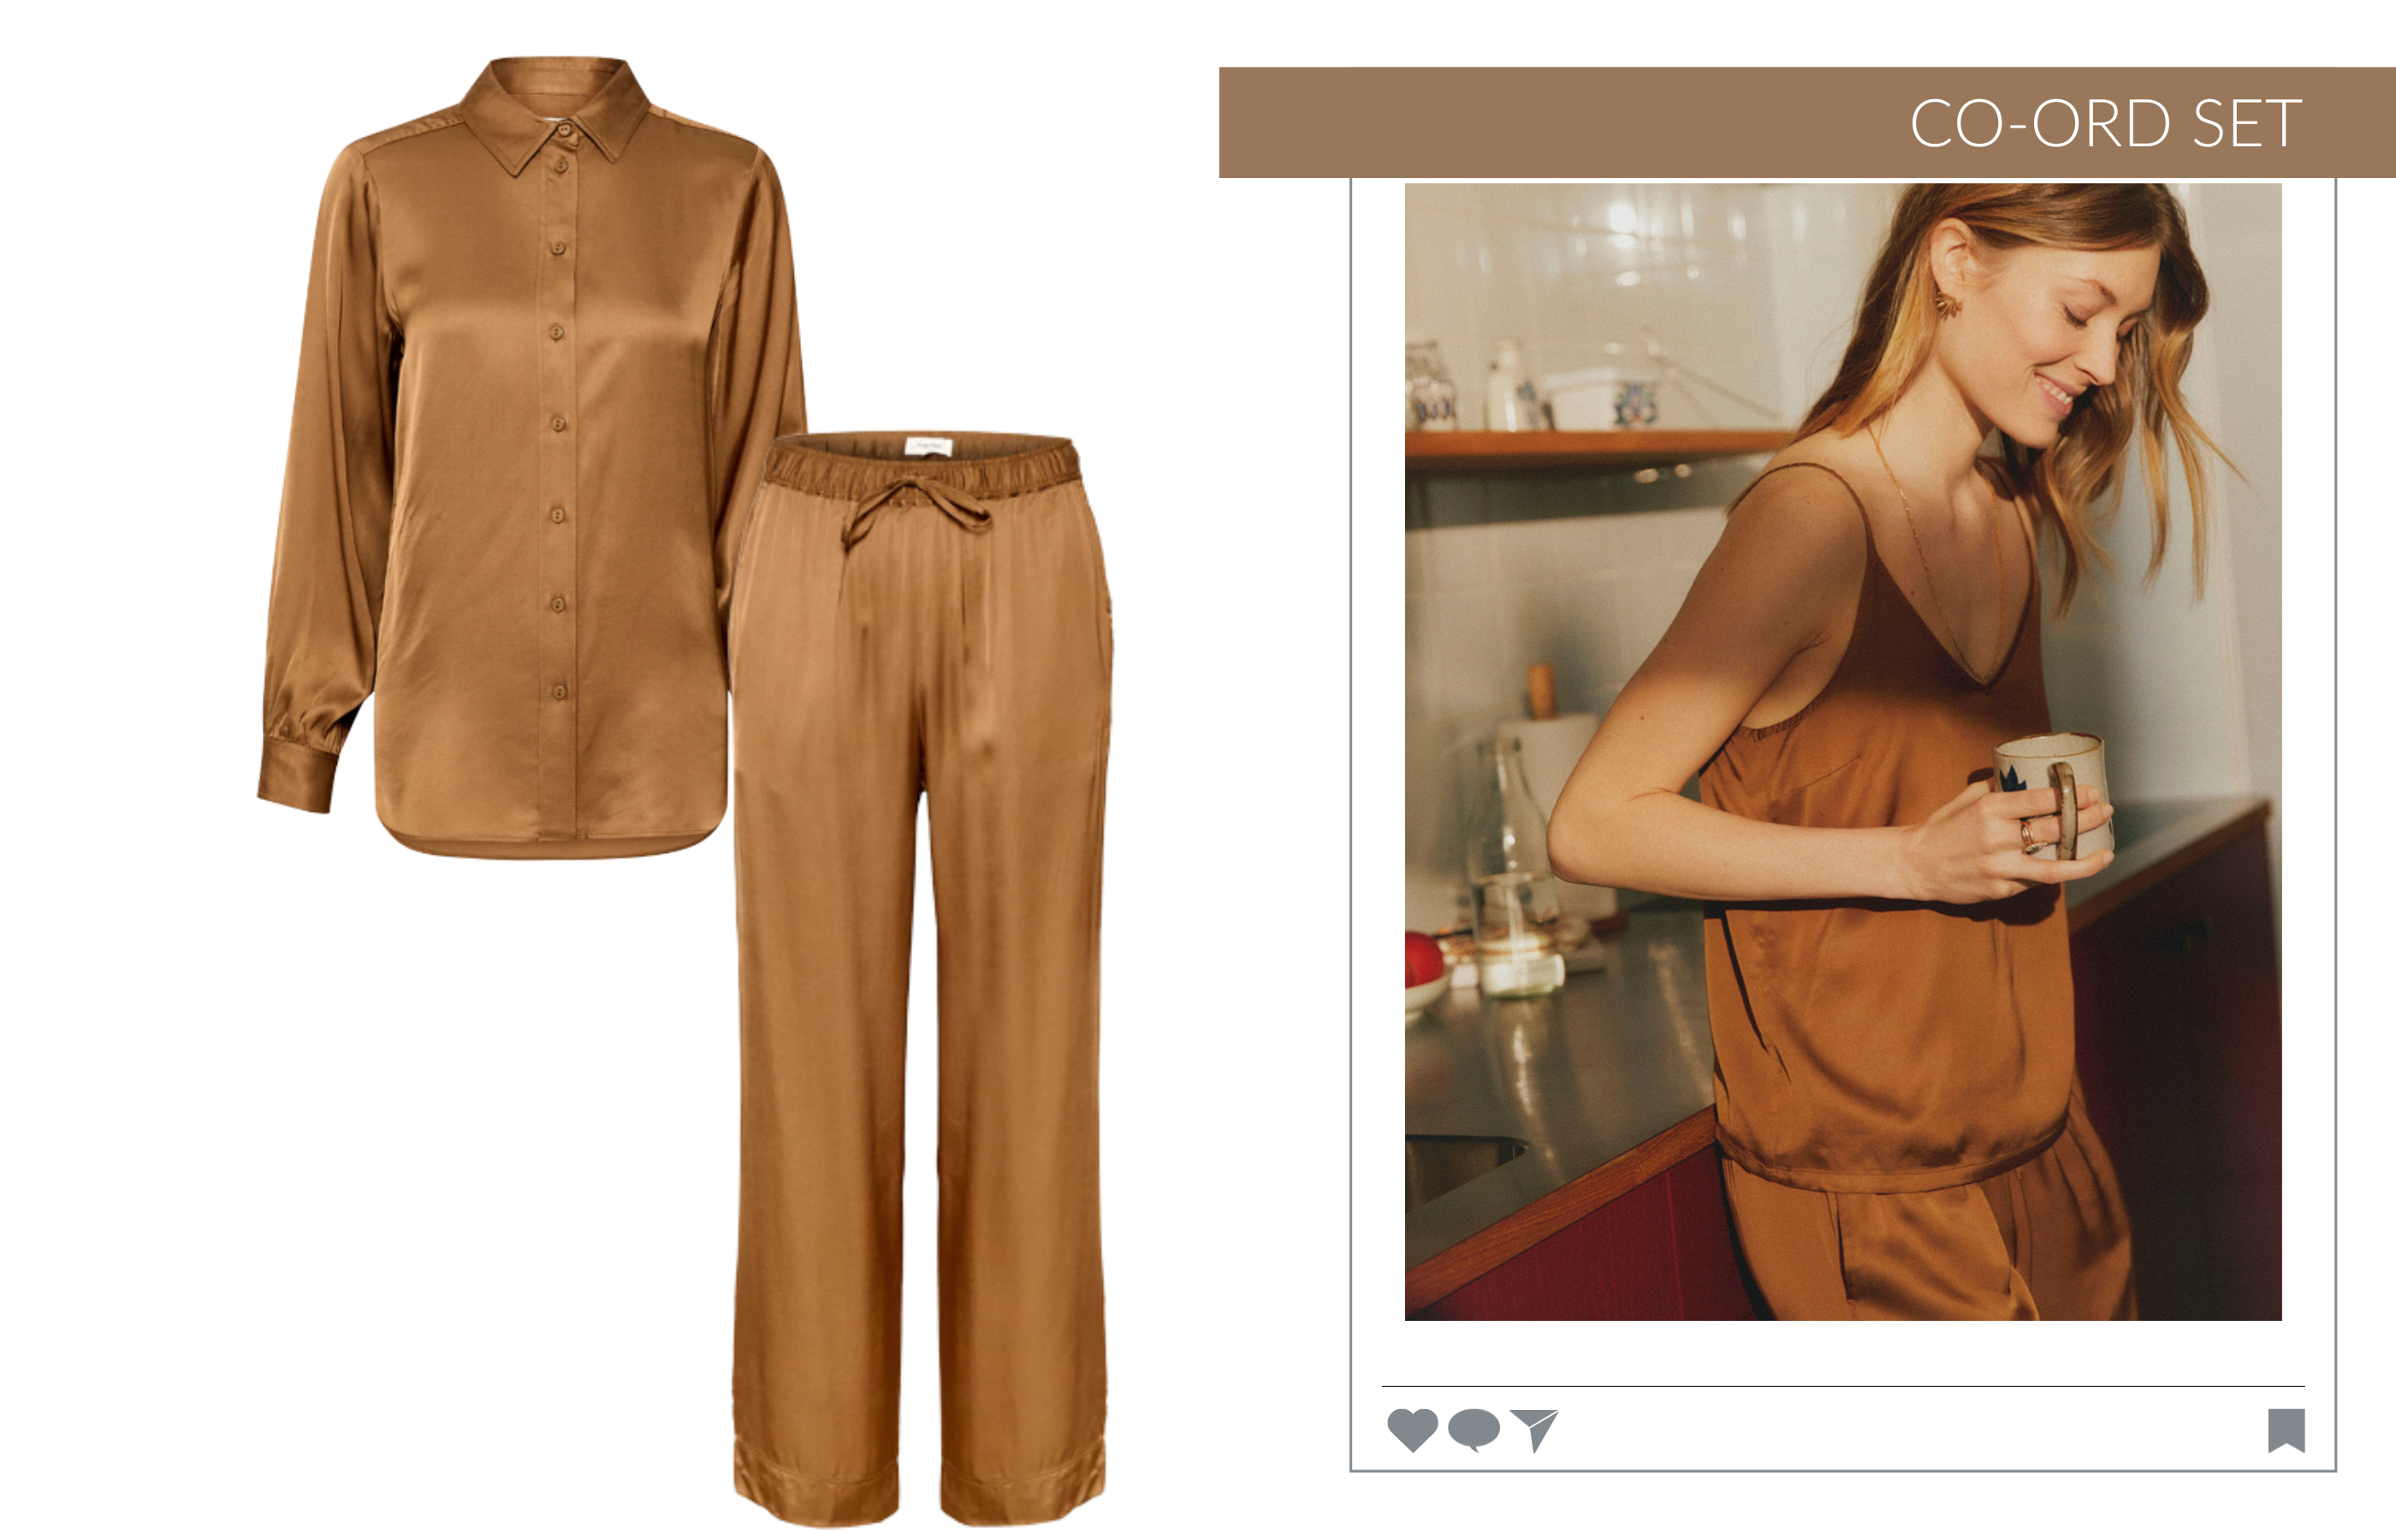 Image of model wearing a silky brown caramel co-ord